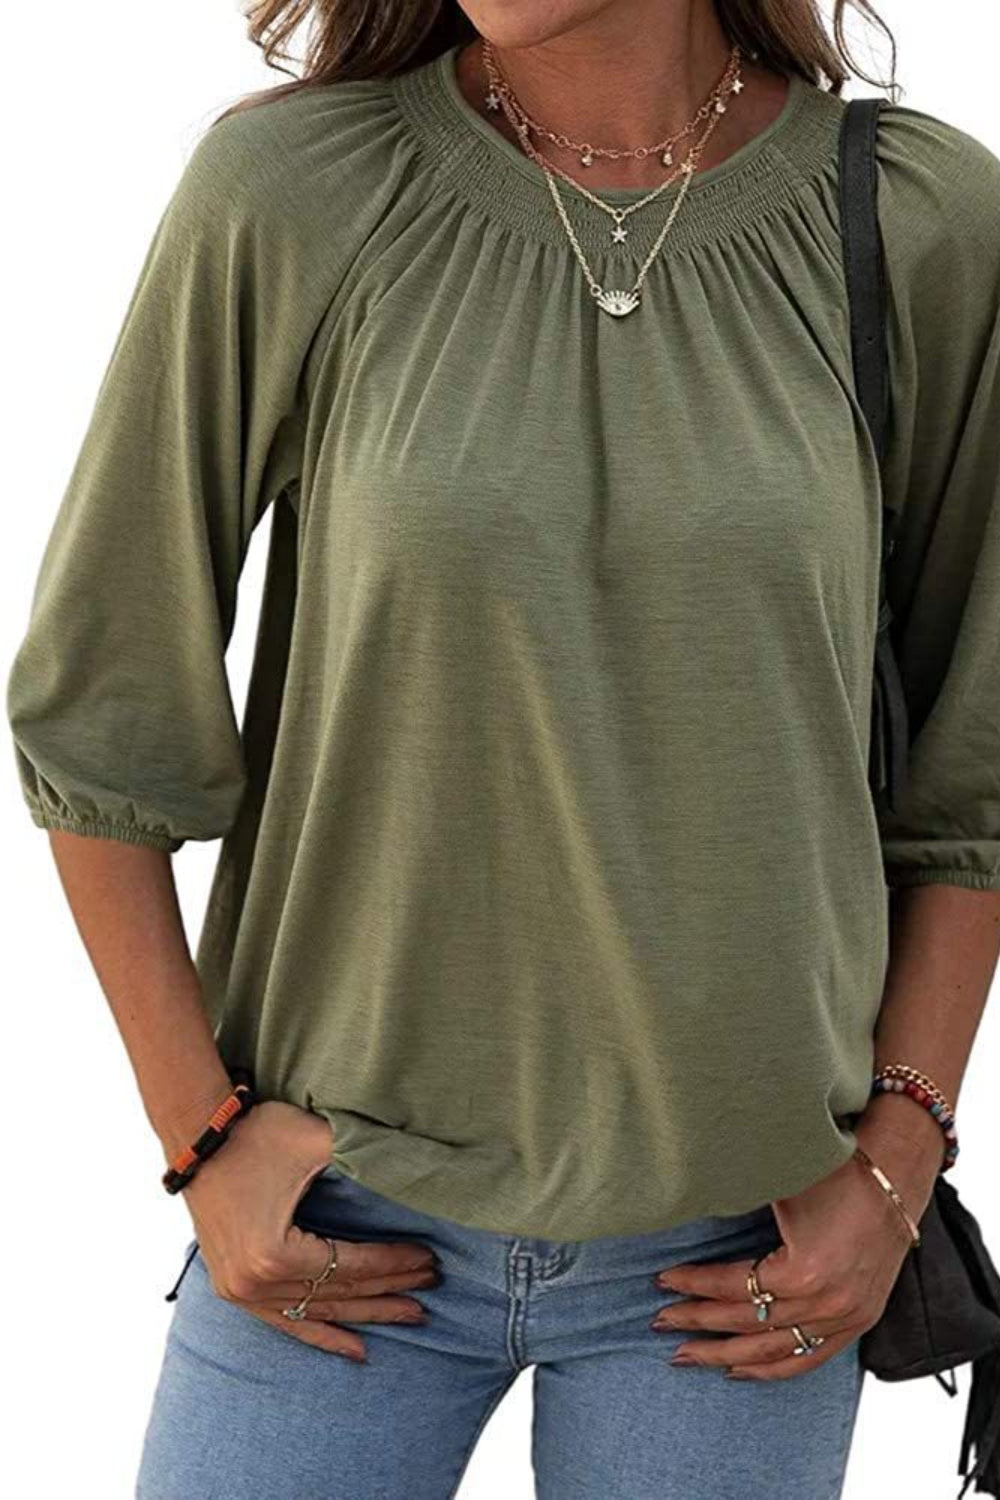 Gathered Detail Round Neck Top (8 Colors)  Krazy Heart Designs Boutique Matcha Green S 